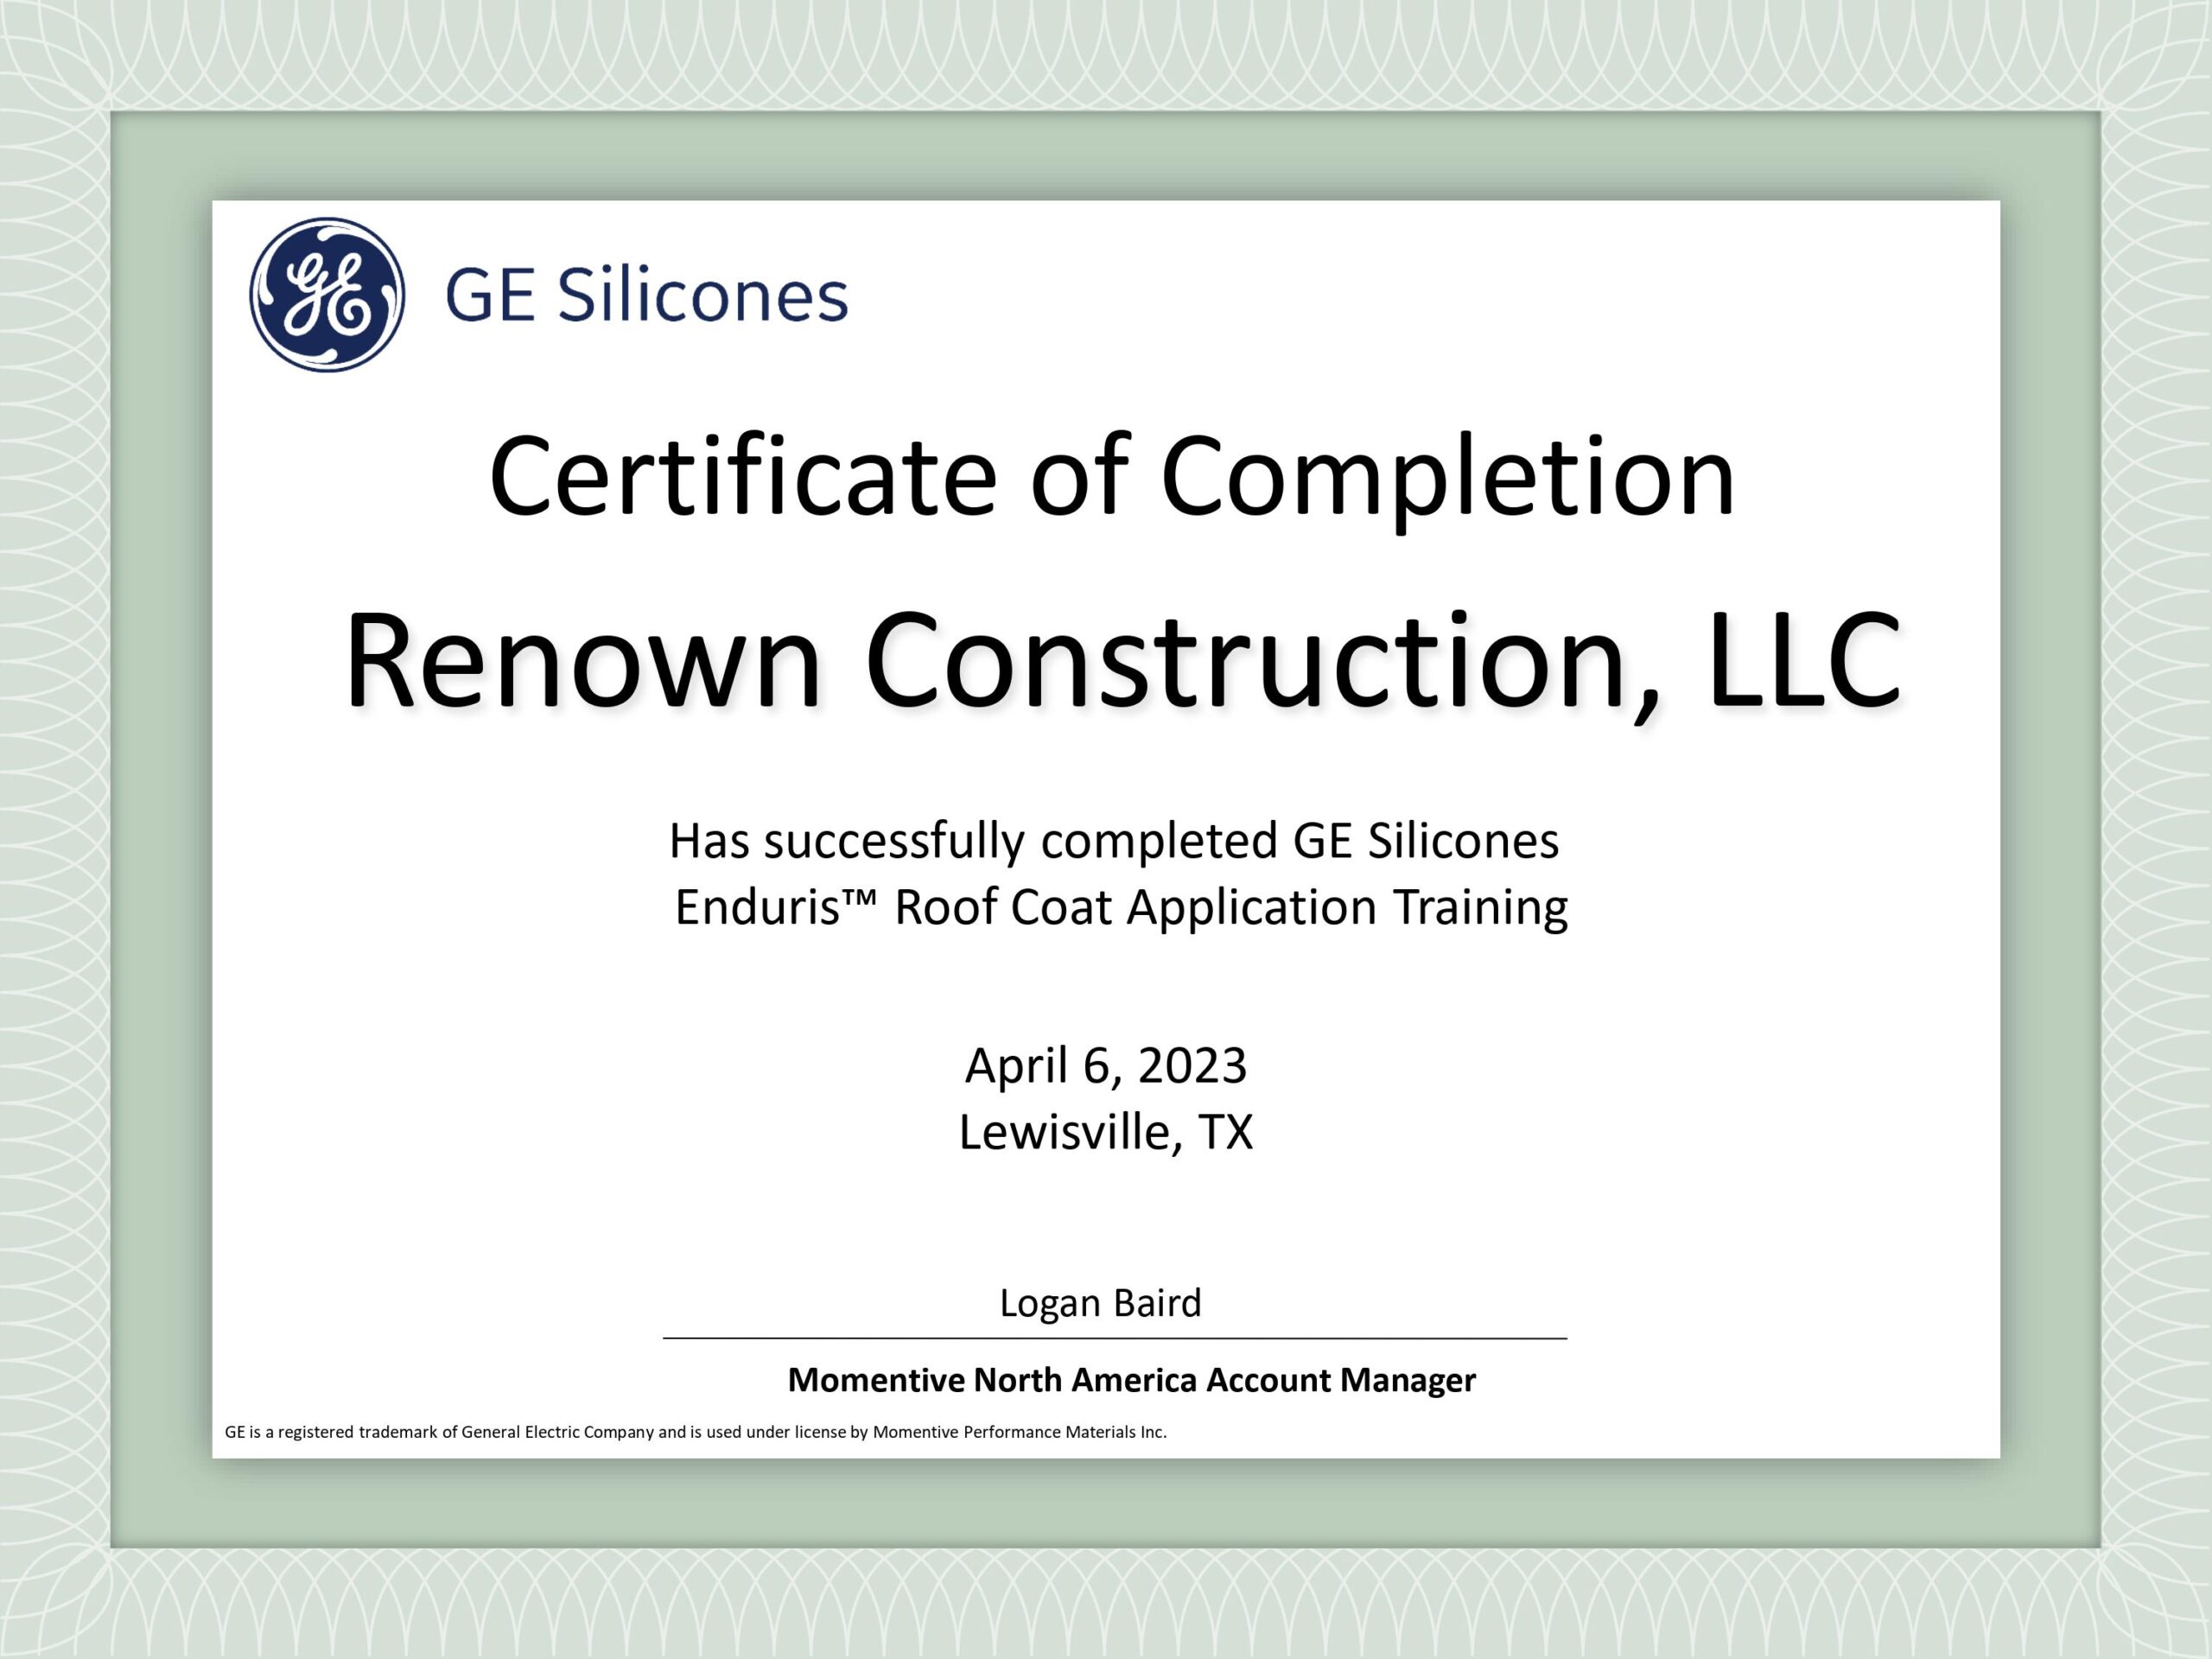 GE Silicones Enduris ™Roof Coat Application Training certificate of completion